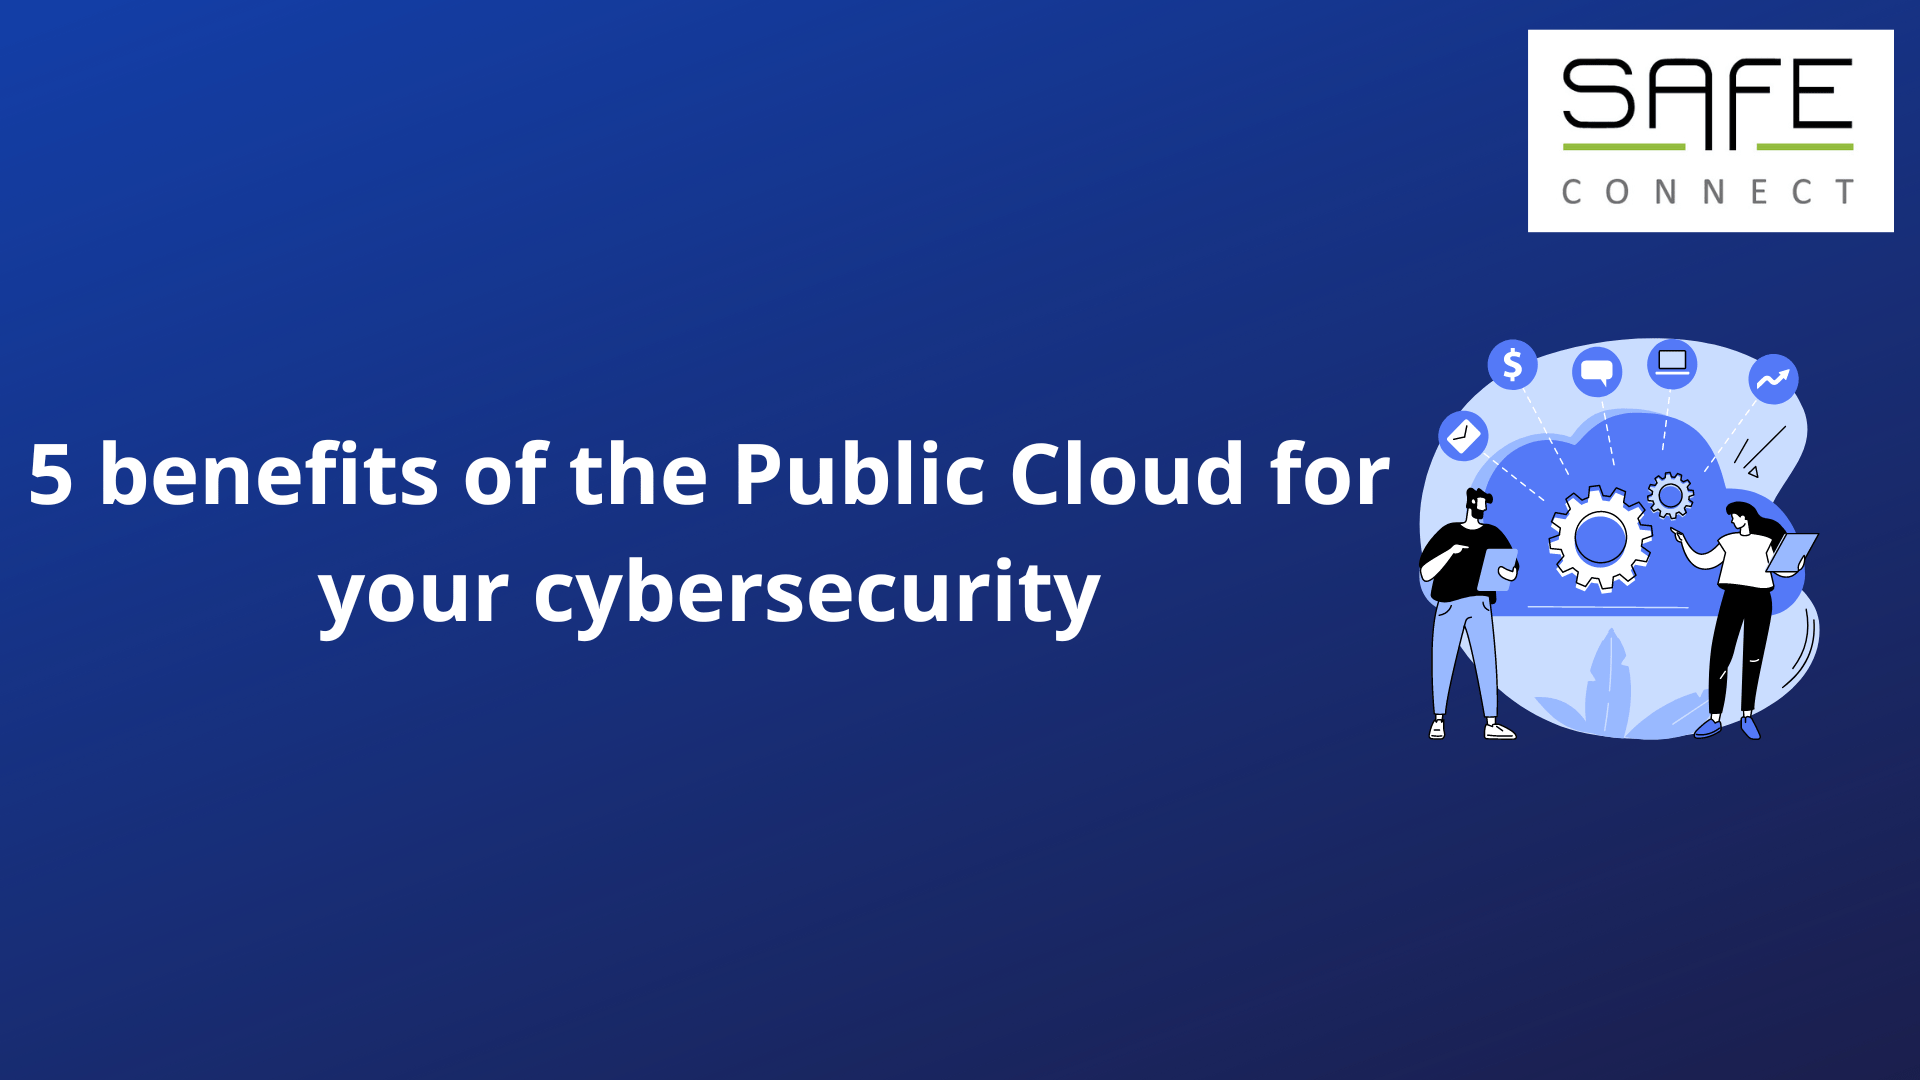 5 benefits of the Public Cloud for your cybersecurity